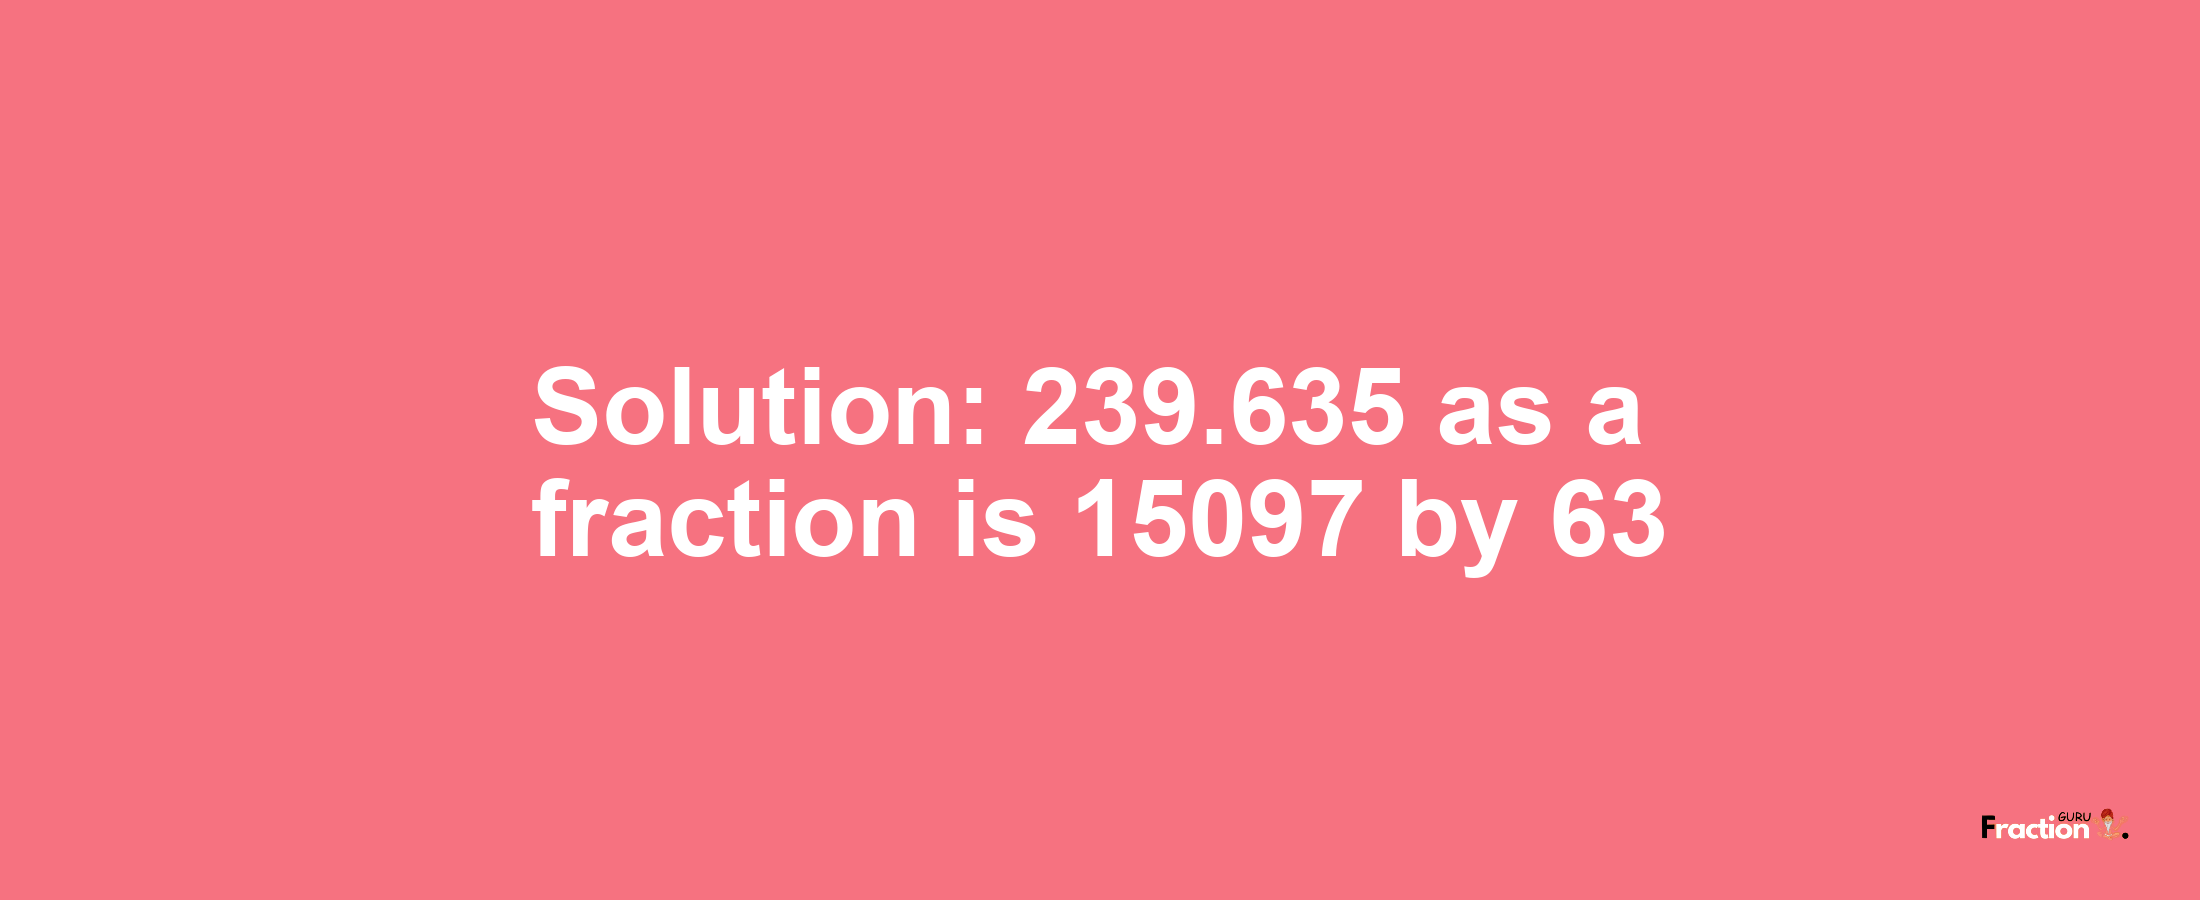 Solution:239.635 as a fraction is 15097/63